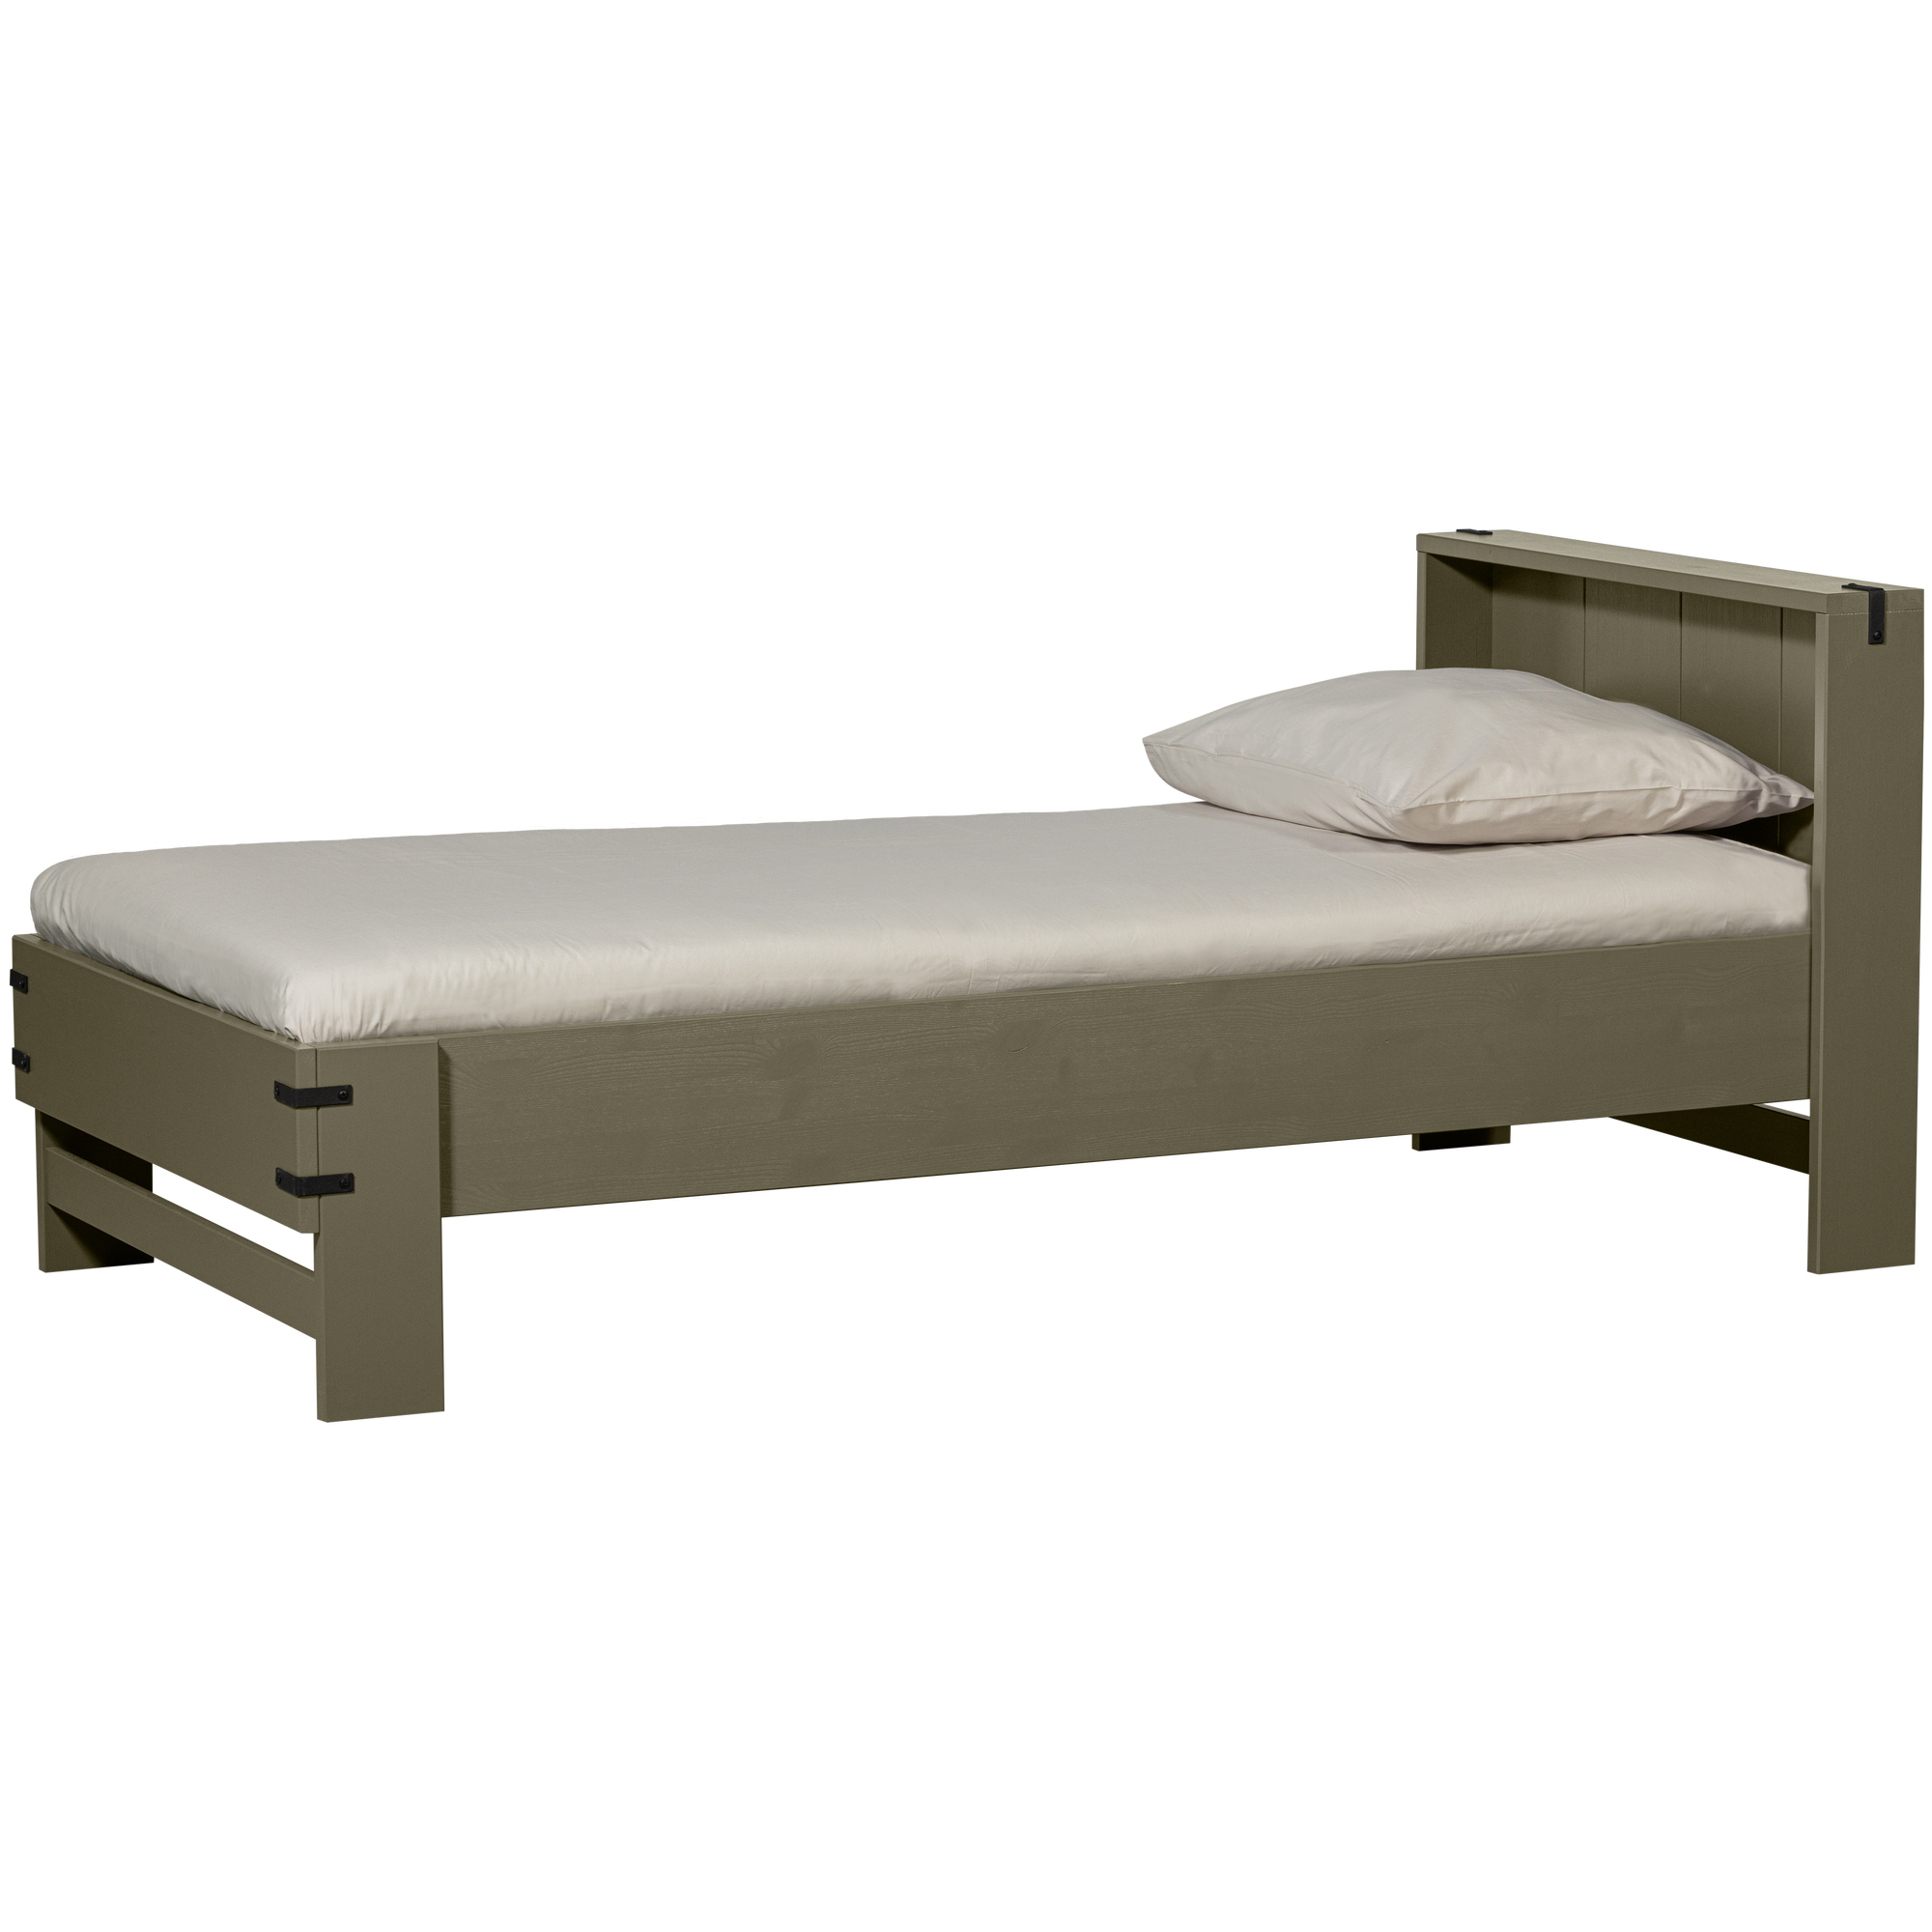 374066-F-01_VS_FA_Bobby_bed_grenen_forrest_200x90cm_SA.png?auto=webp&format=png&width=2000&height=2000